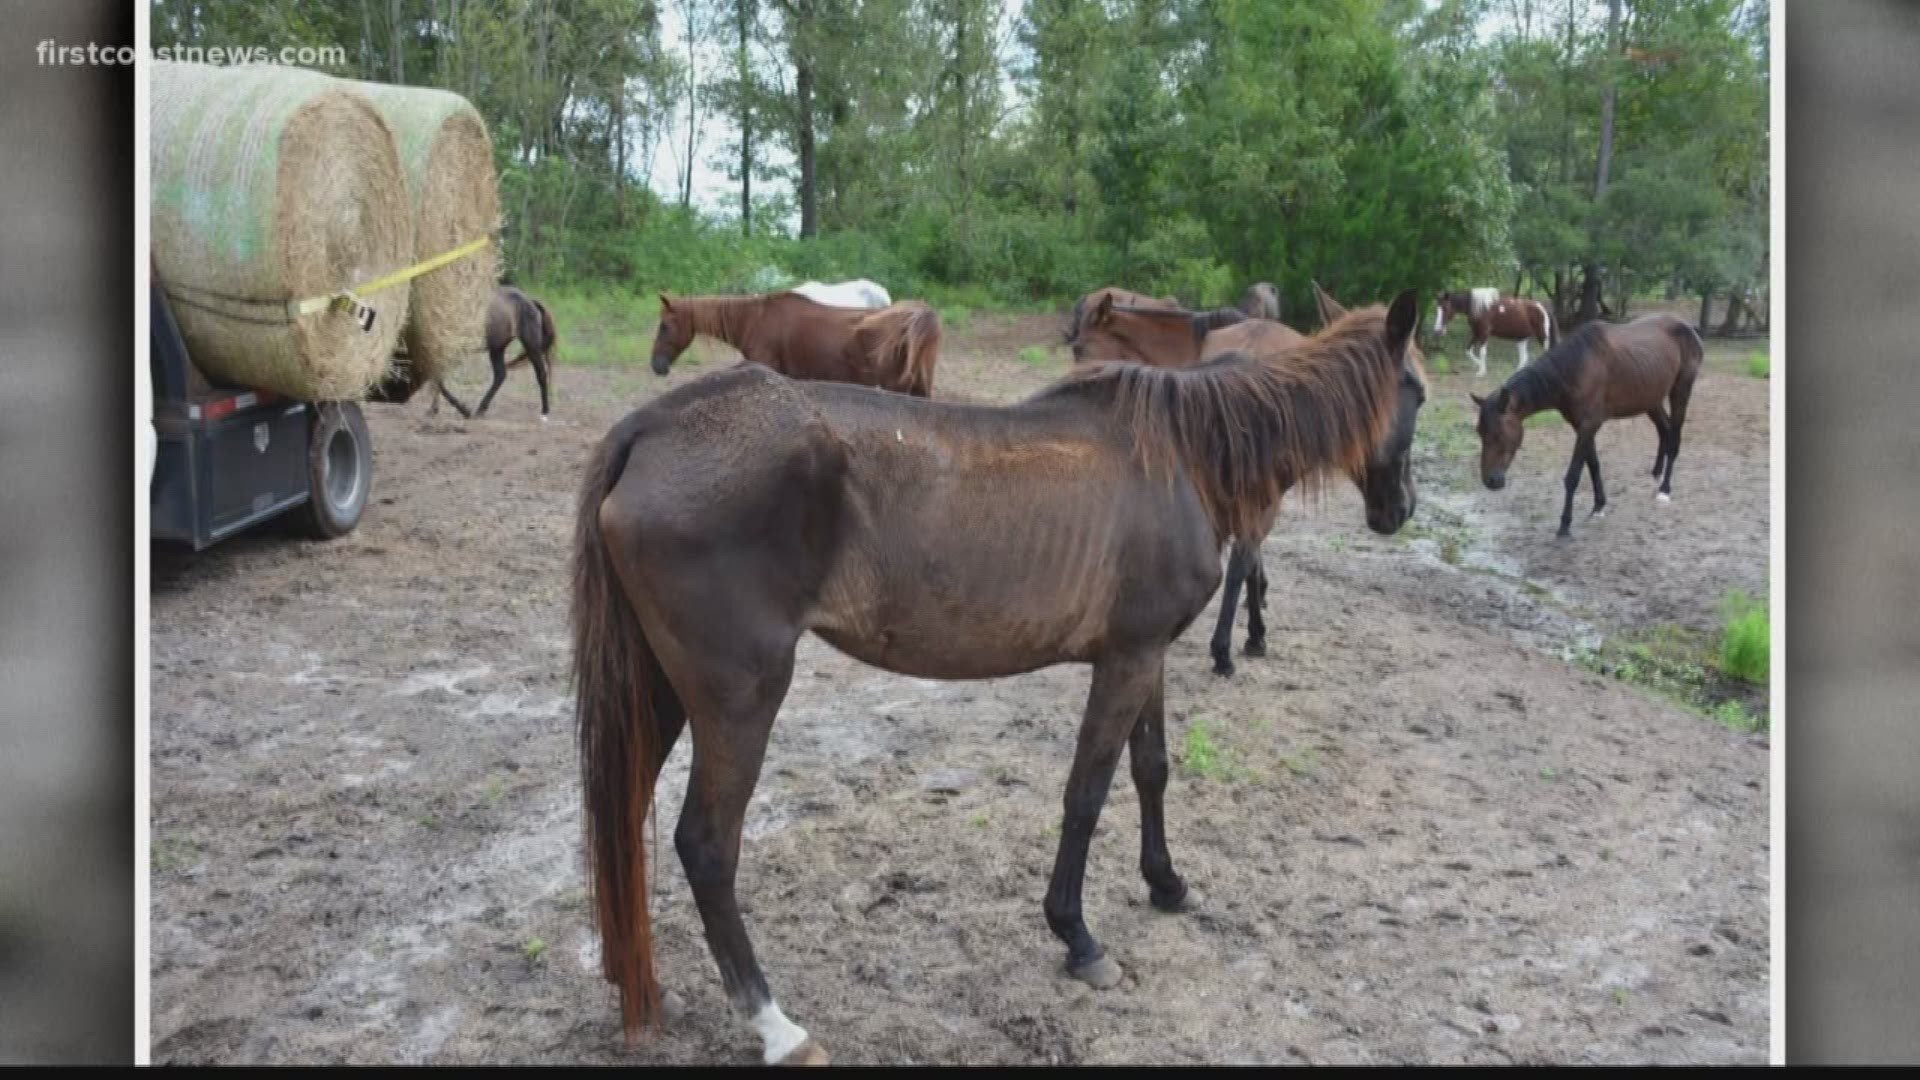 Deputies said over 50 horses were found in "inadequate" conditions on the property of Cheryl Ervin and Richard Ervin back in October 2018.